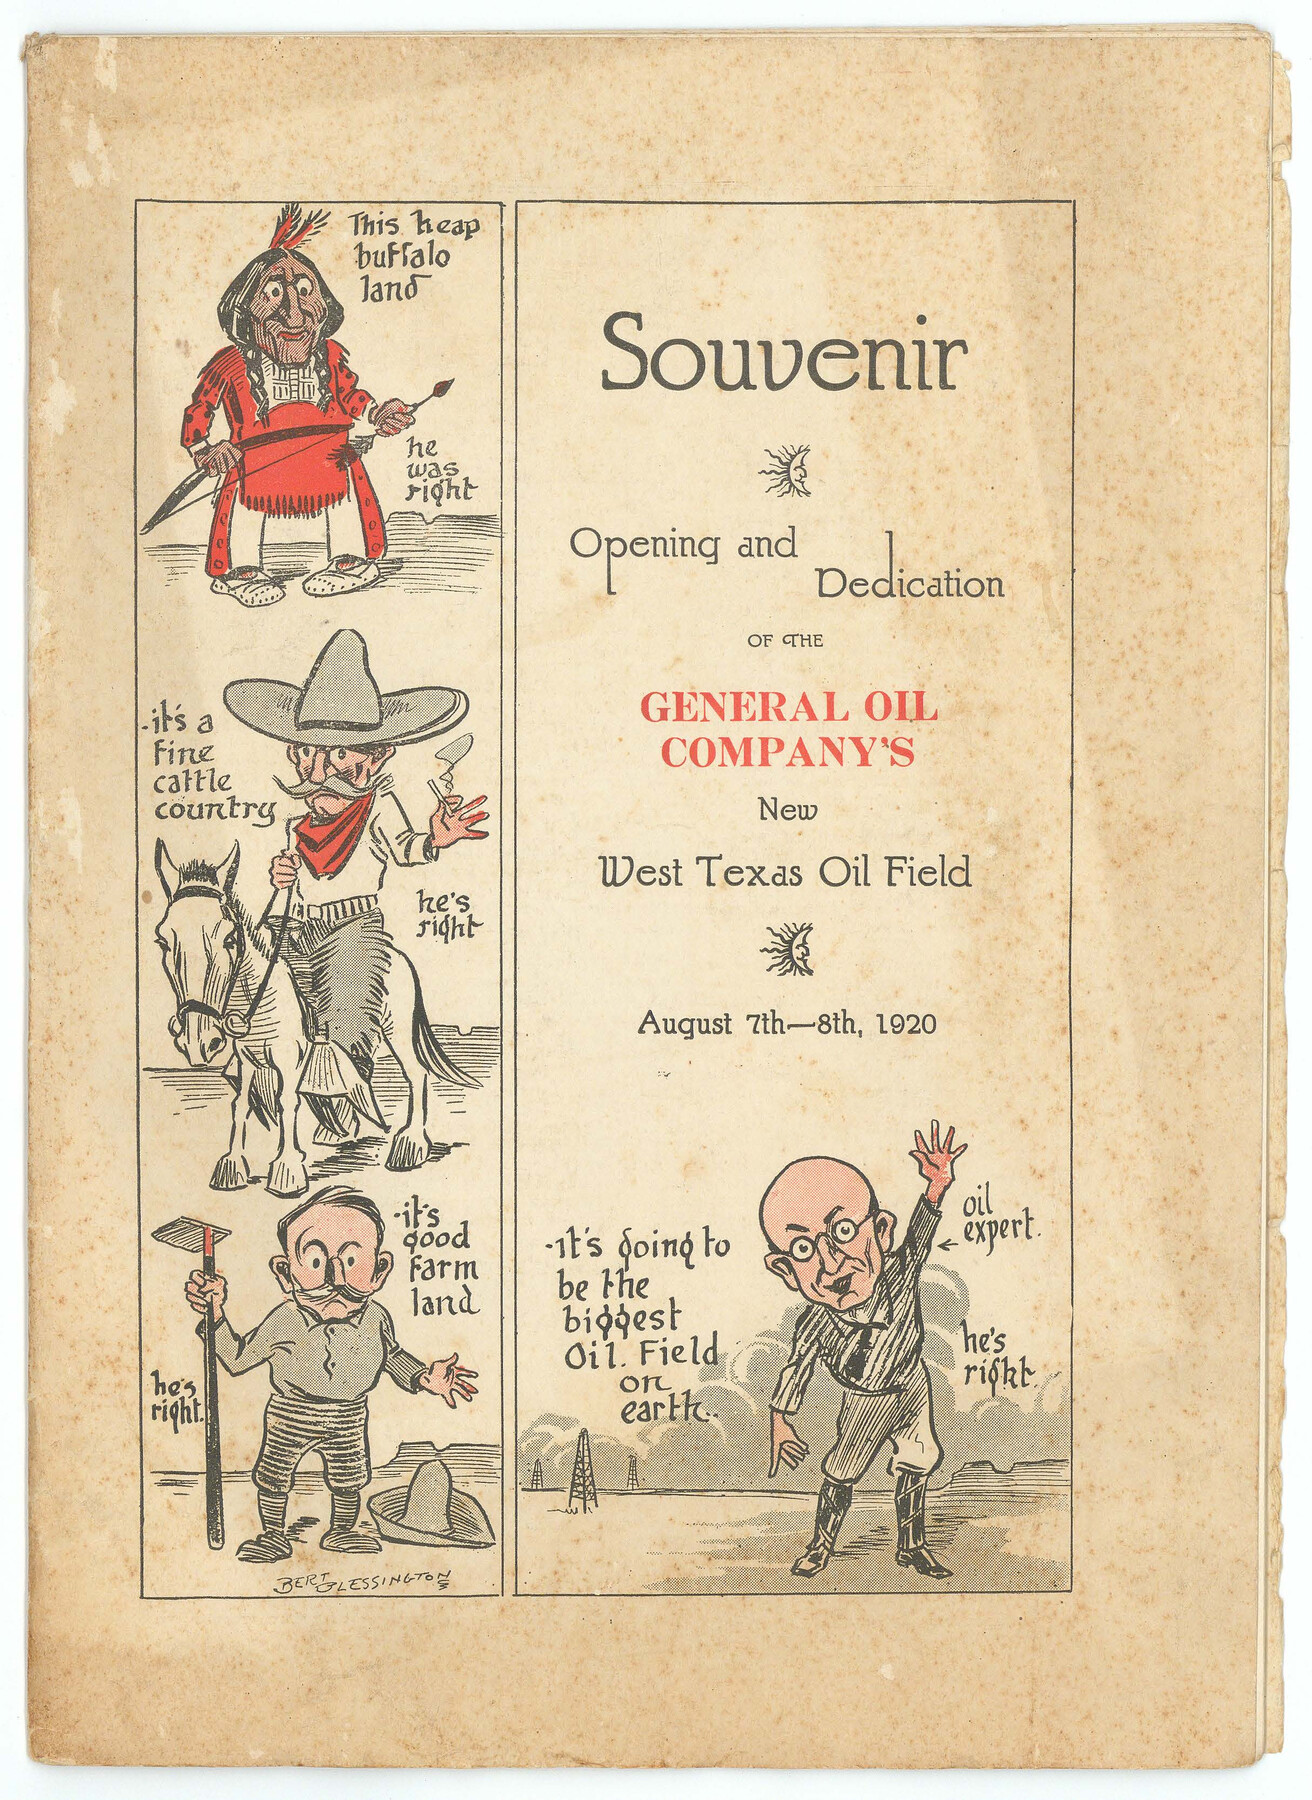 97263, Souvenir - Opening and Dedication of the General Oil Company's New West Texas Oil Field